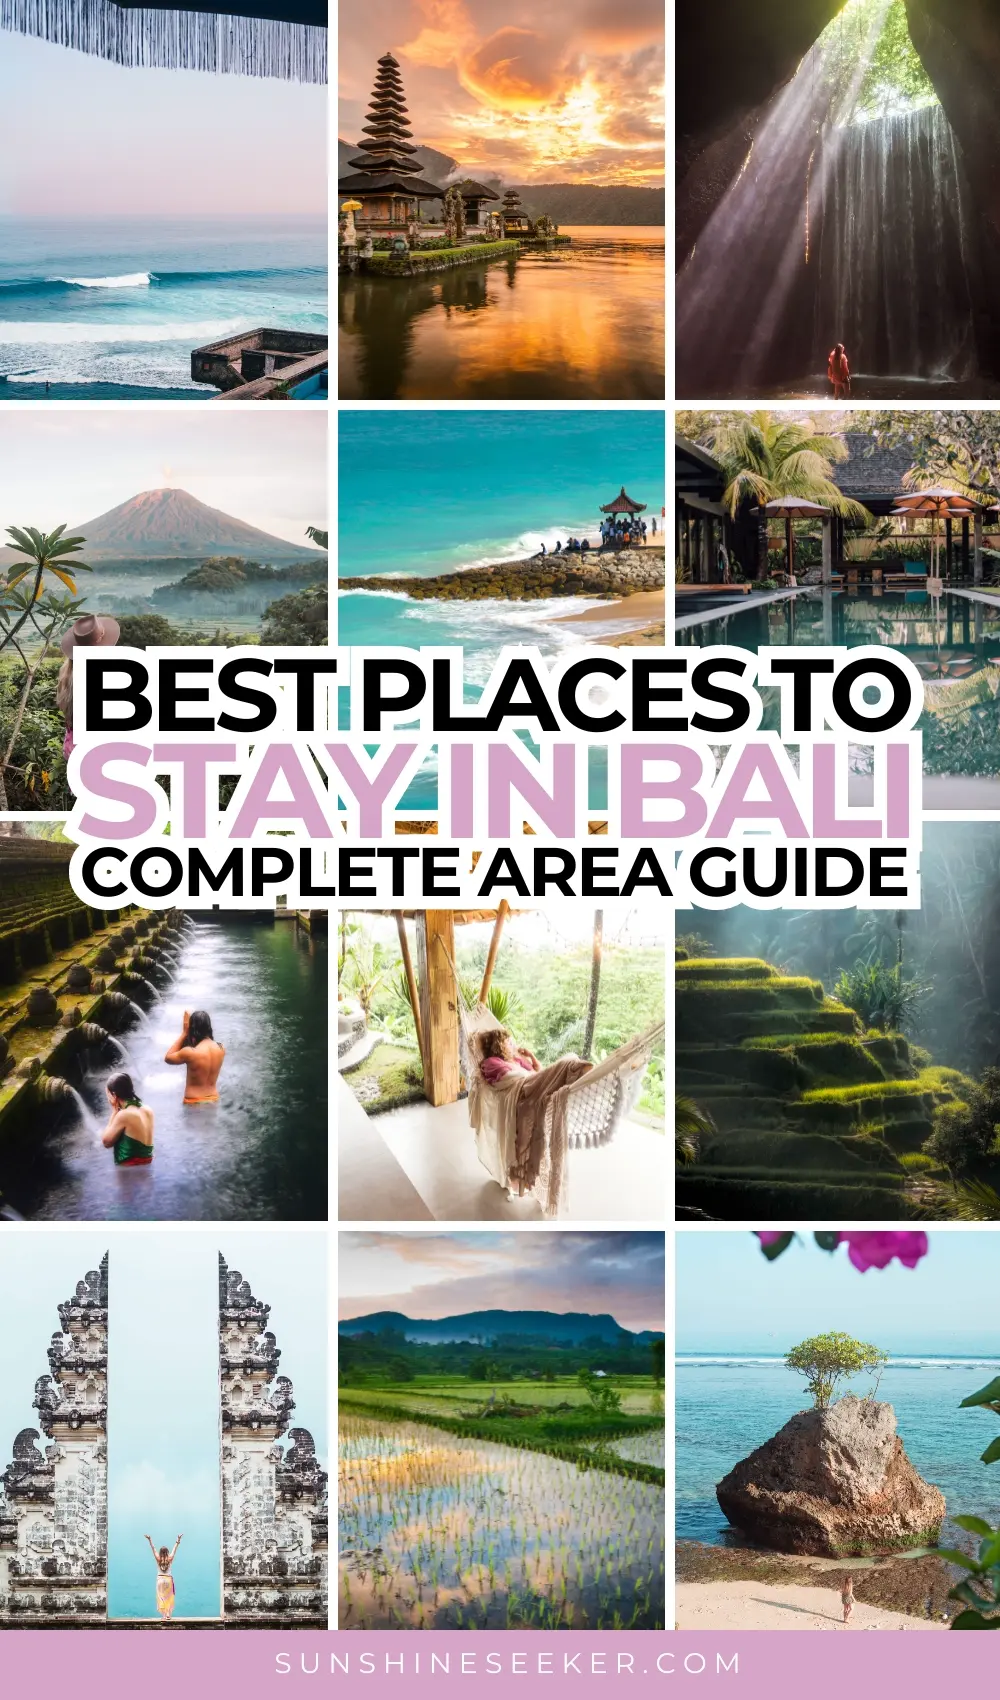 Are you having trouble deciding on which areas to include in your Bali itinerary? Then you should check out this complete island area guide! Get a quick overview of Uluwatu, Ubud, Amed, Canggu, Seminyak, Jimbaran + many more.